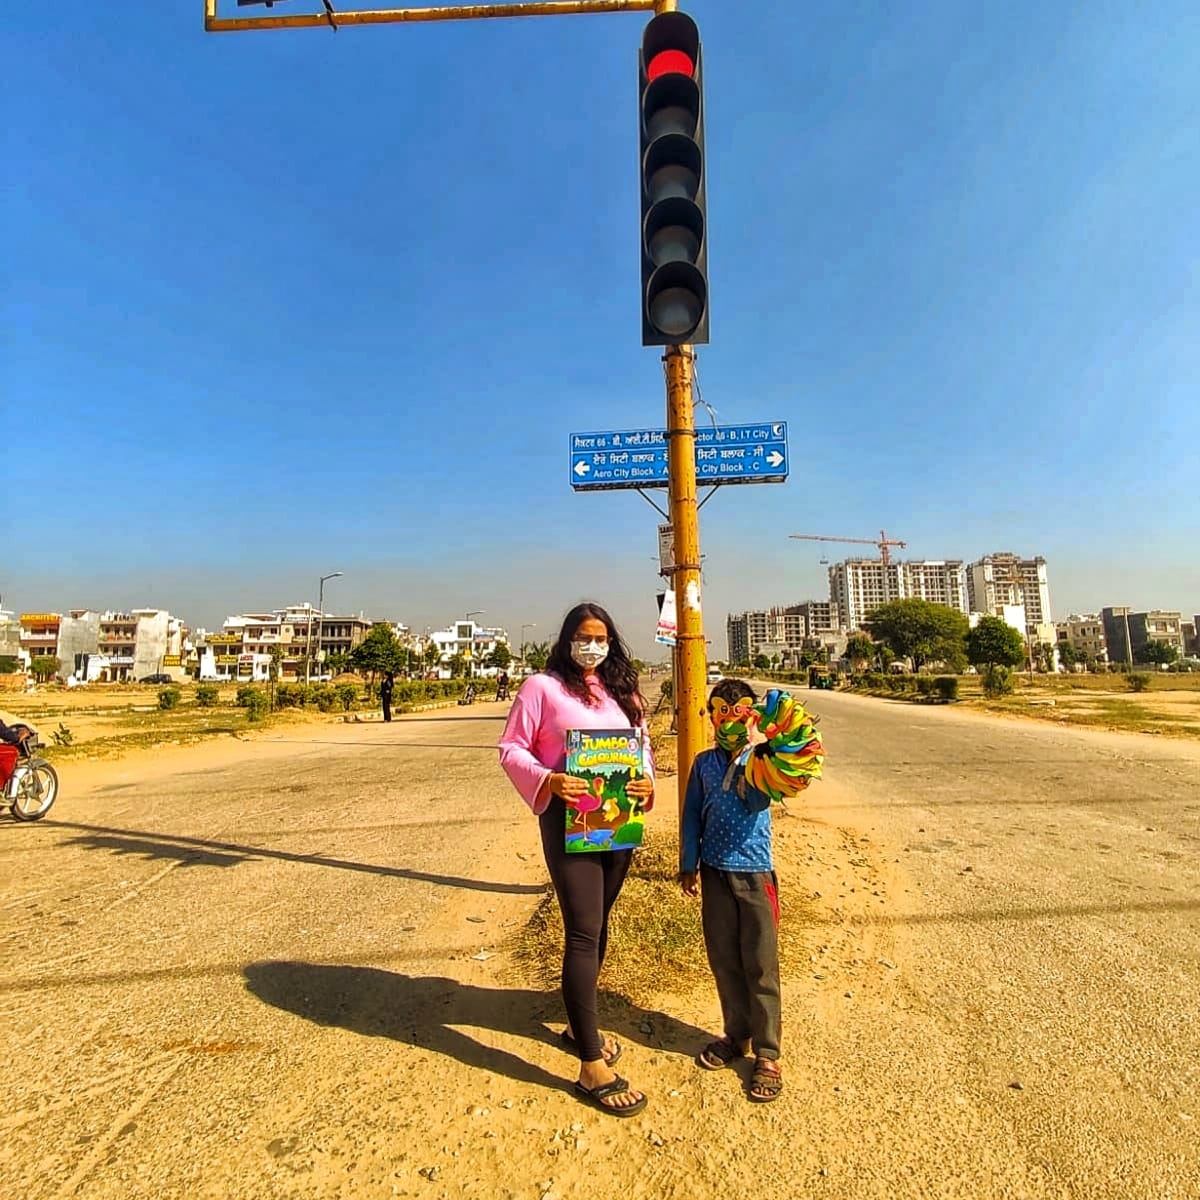 It's #childrensday!

But where are the children? On the red lights begging just for the chillar. We at @aashmanfoundation along with voice brand ambassador @vjaman launches #ChillarToPillar 

#educationforall  #stopchildlabour #aashmanfoundation #vjaman #aashman4u #widowhelpdesk